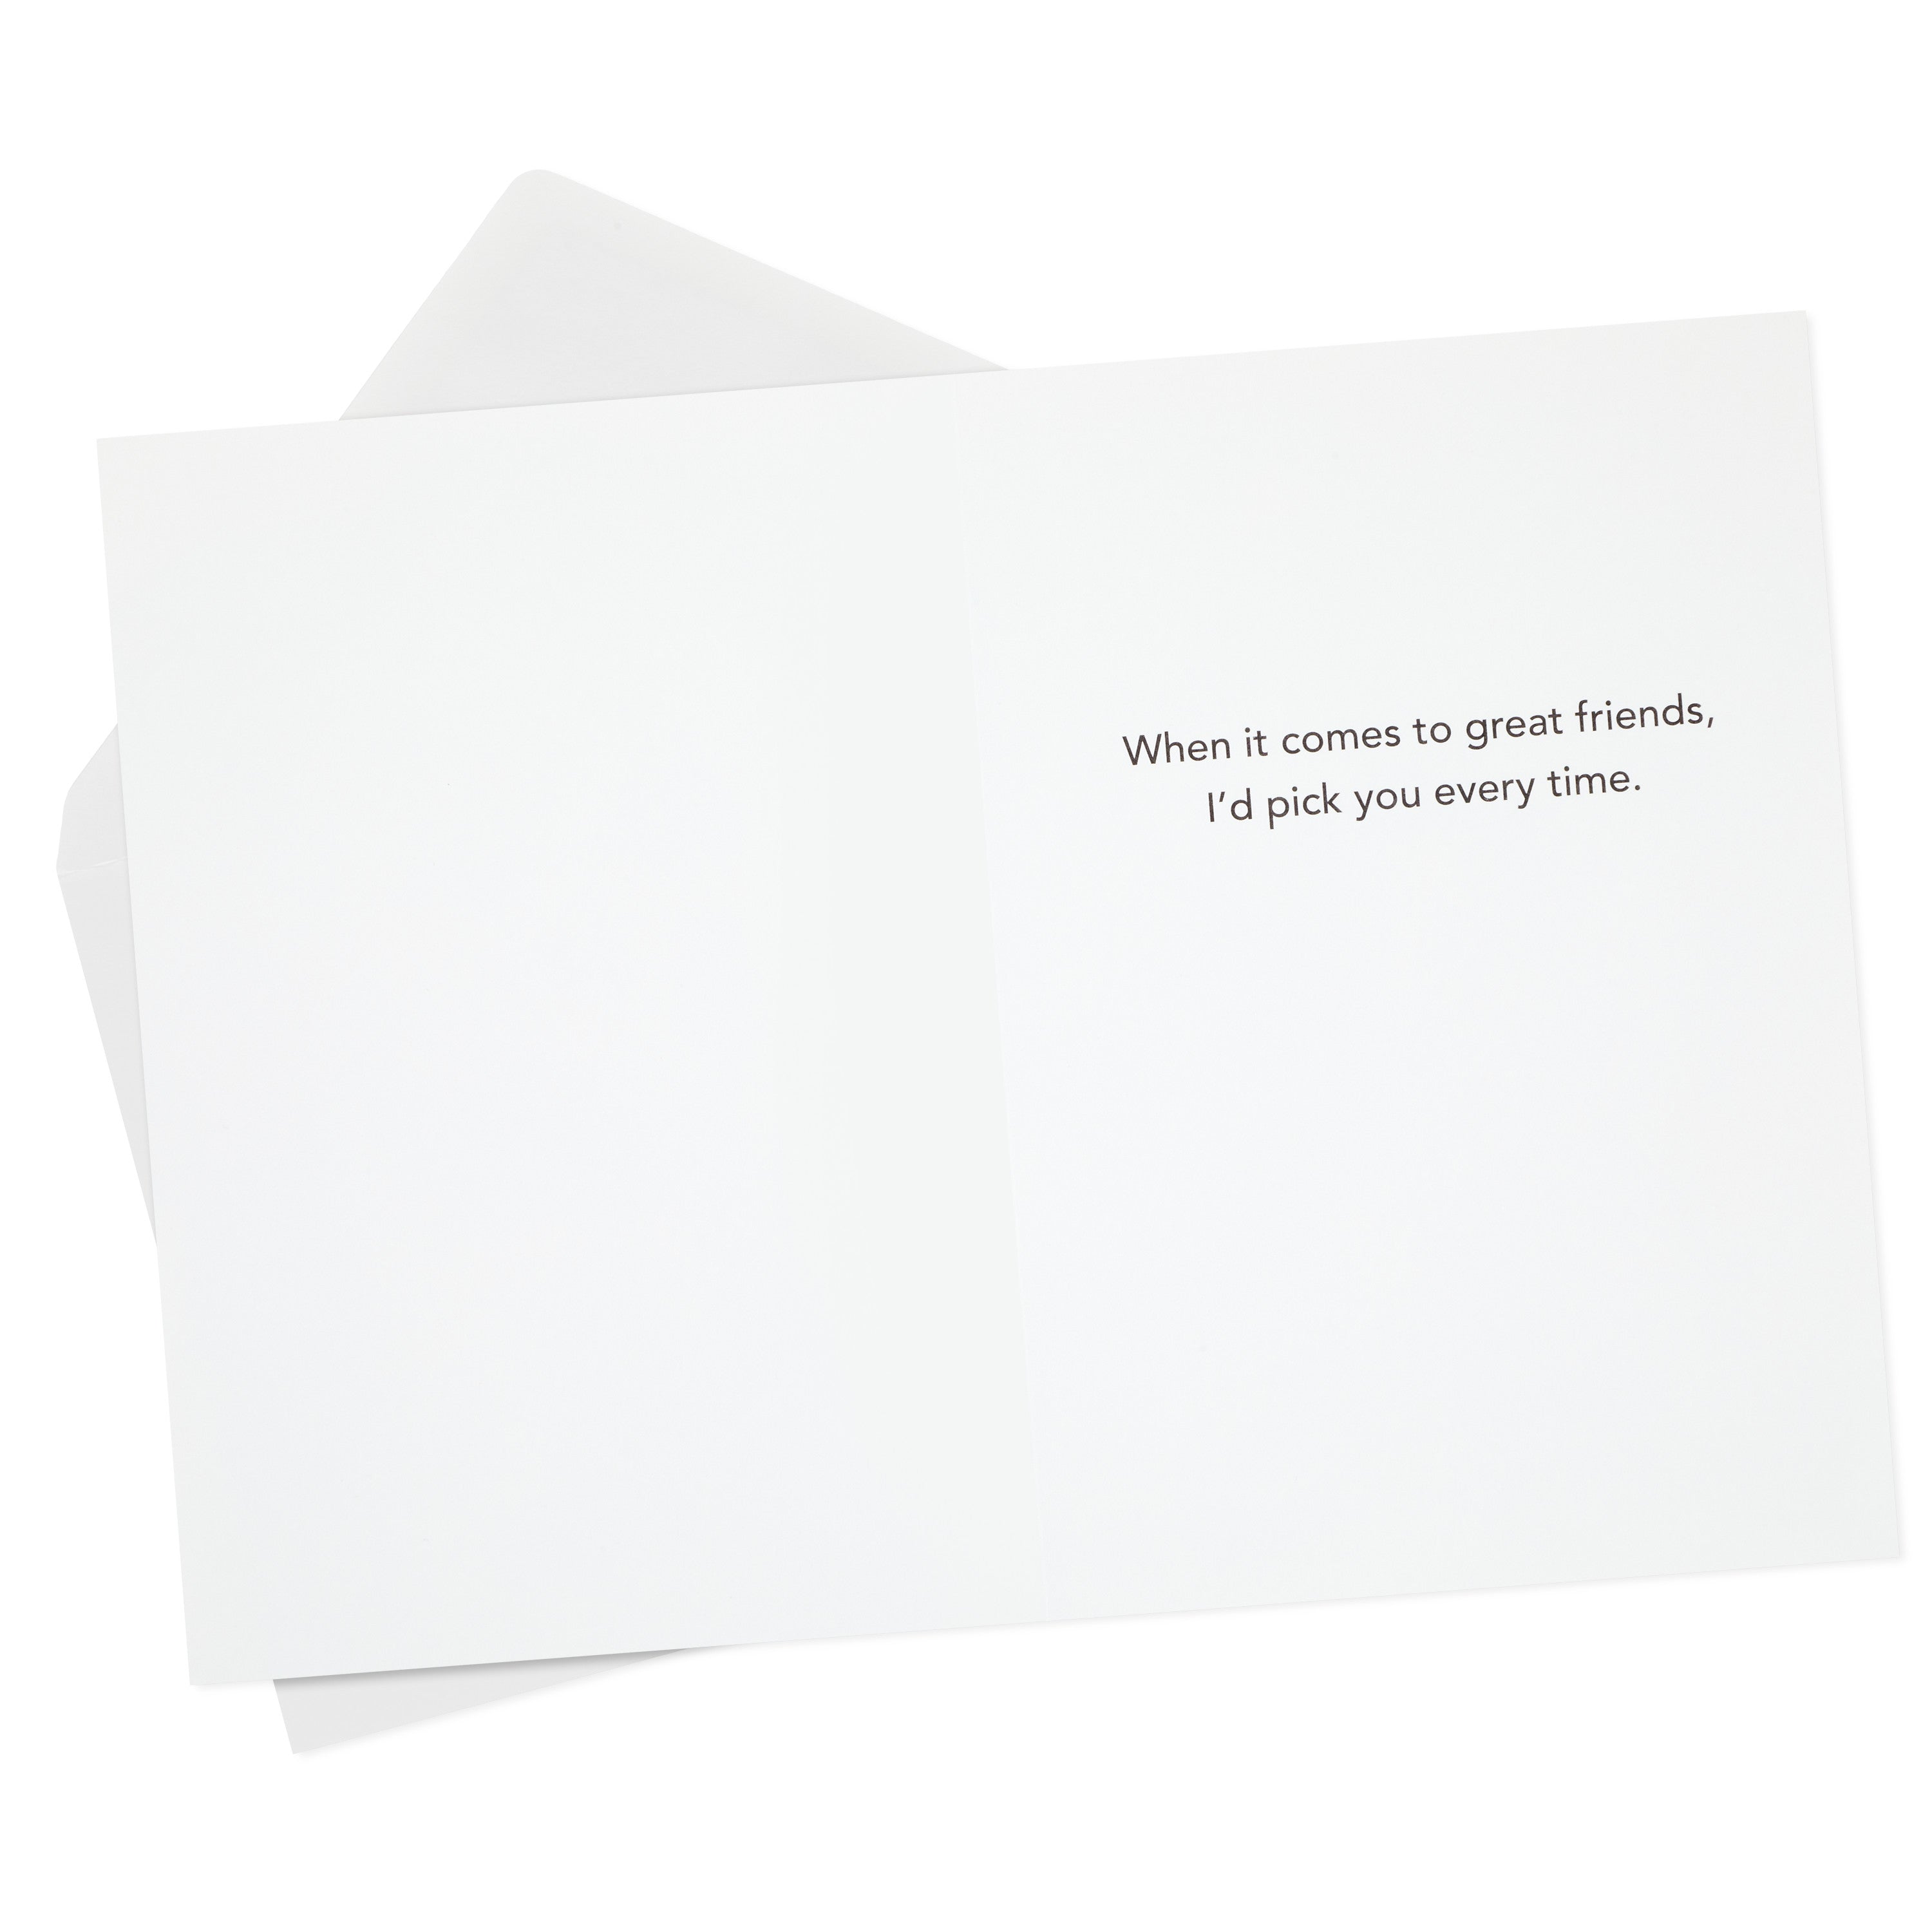 Friendship Card, Thank You Card, Thinking of You Card (Pick You)